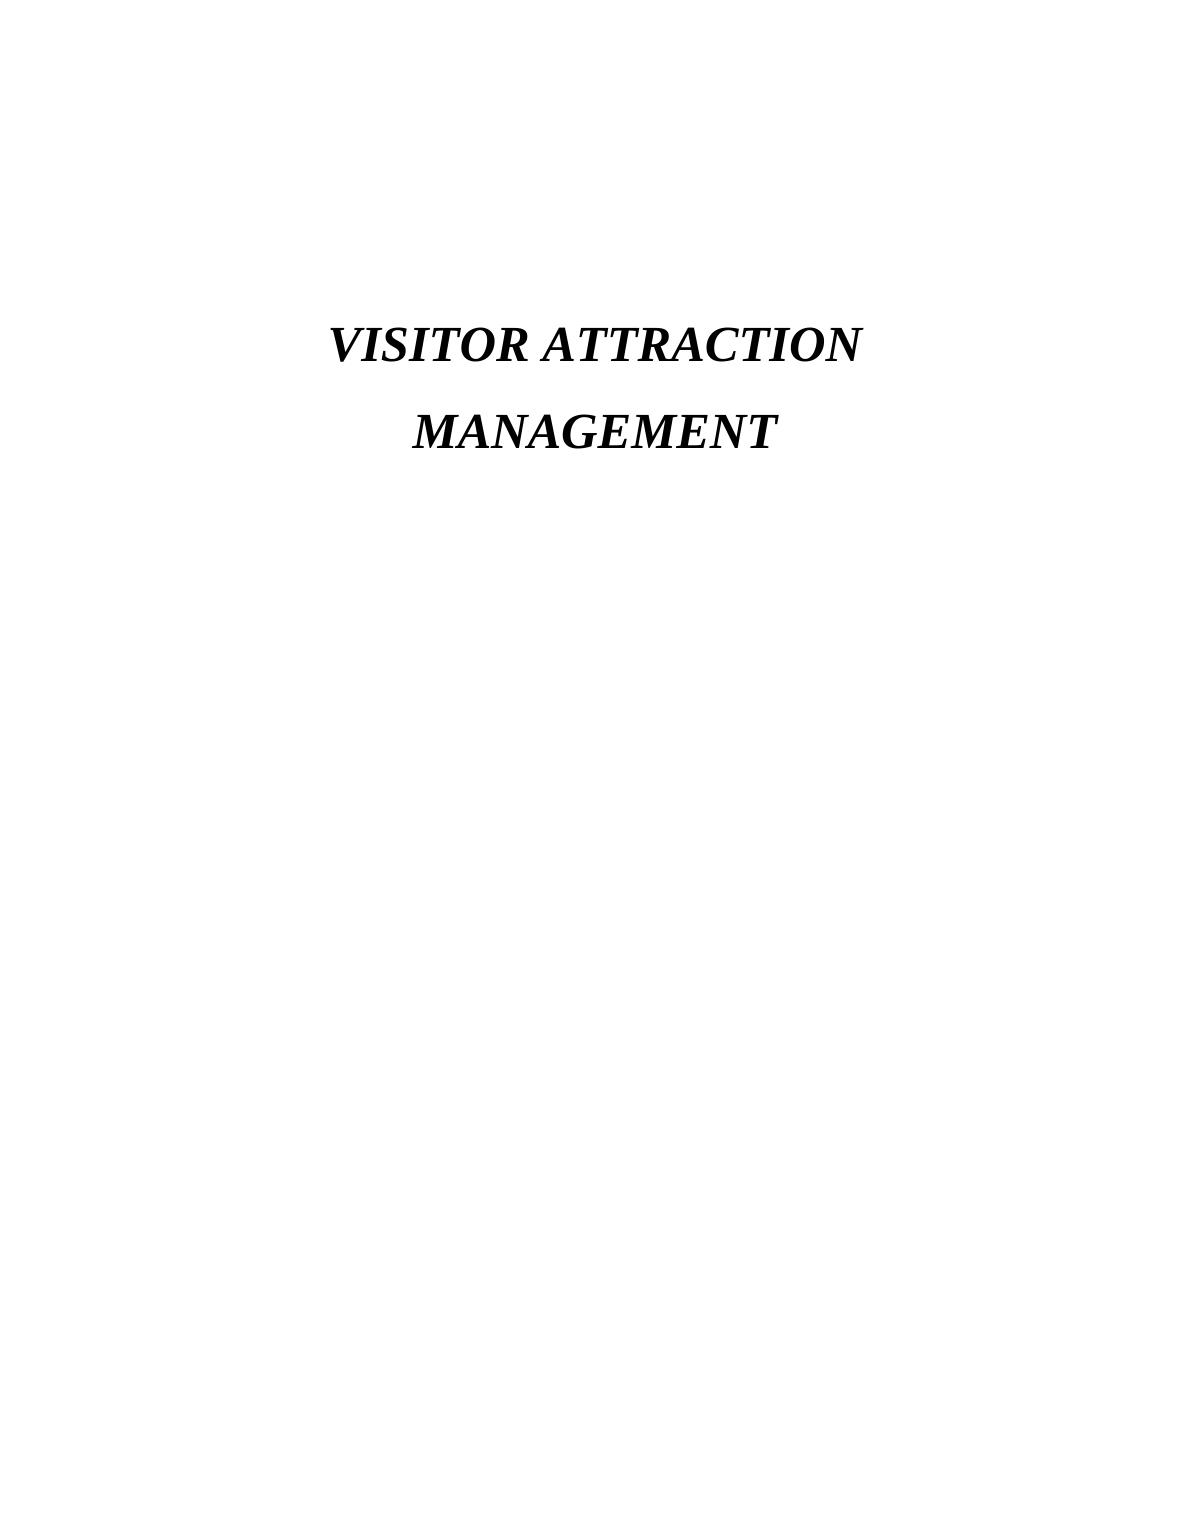 Visitor Attraction Management- PDF_1